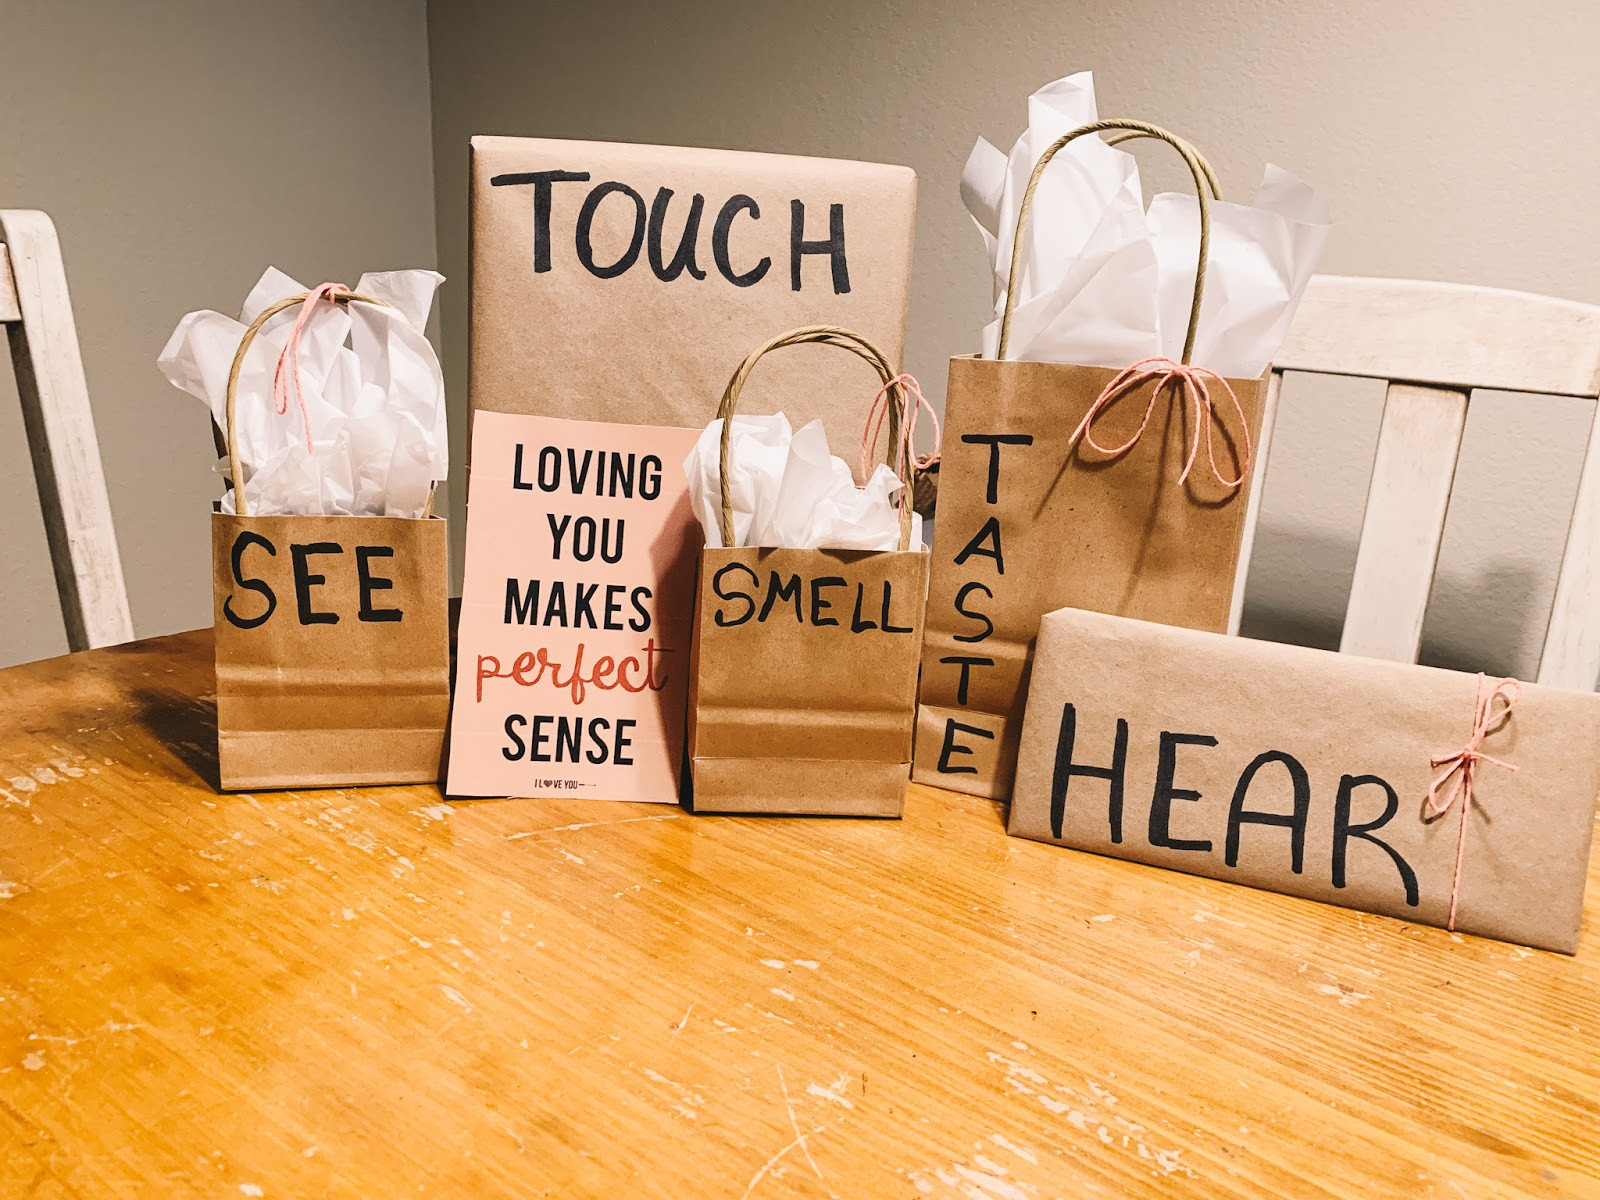 Valentines Day Presents Ideas
 The 5 Senses Valentines Day Gift Ideas for Him & Her